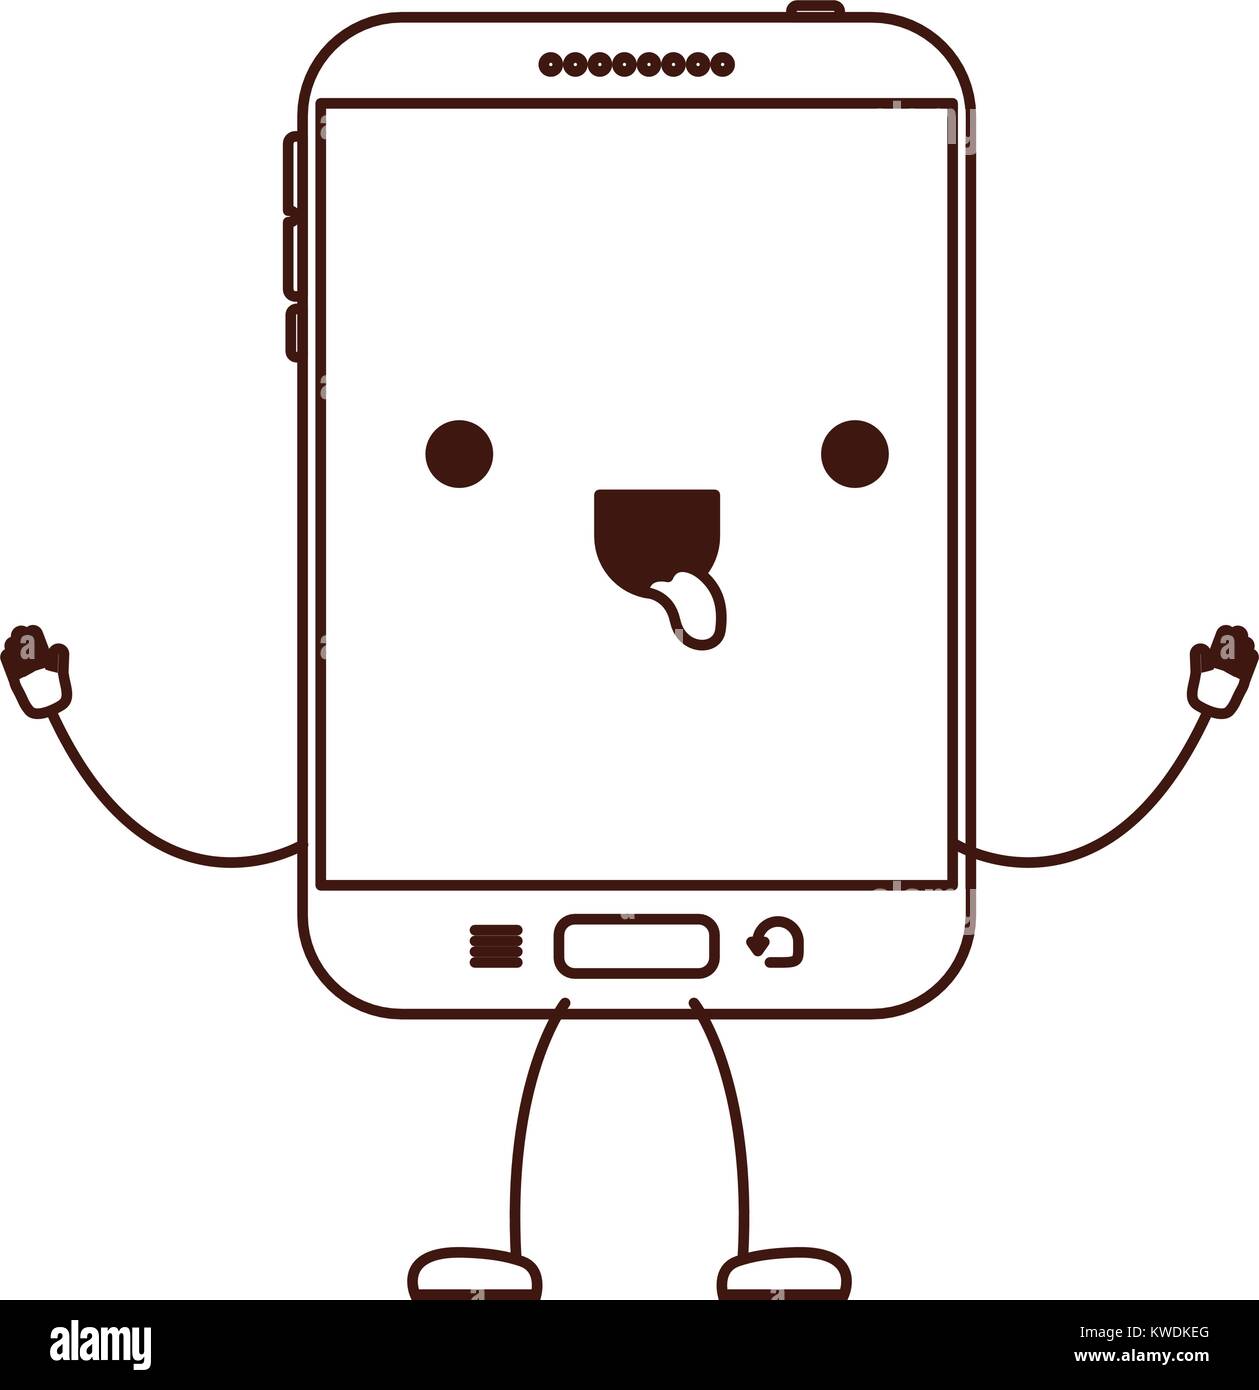 animated kawaii tablet device icon in monochrome silhouette Stock ...